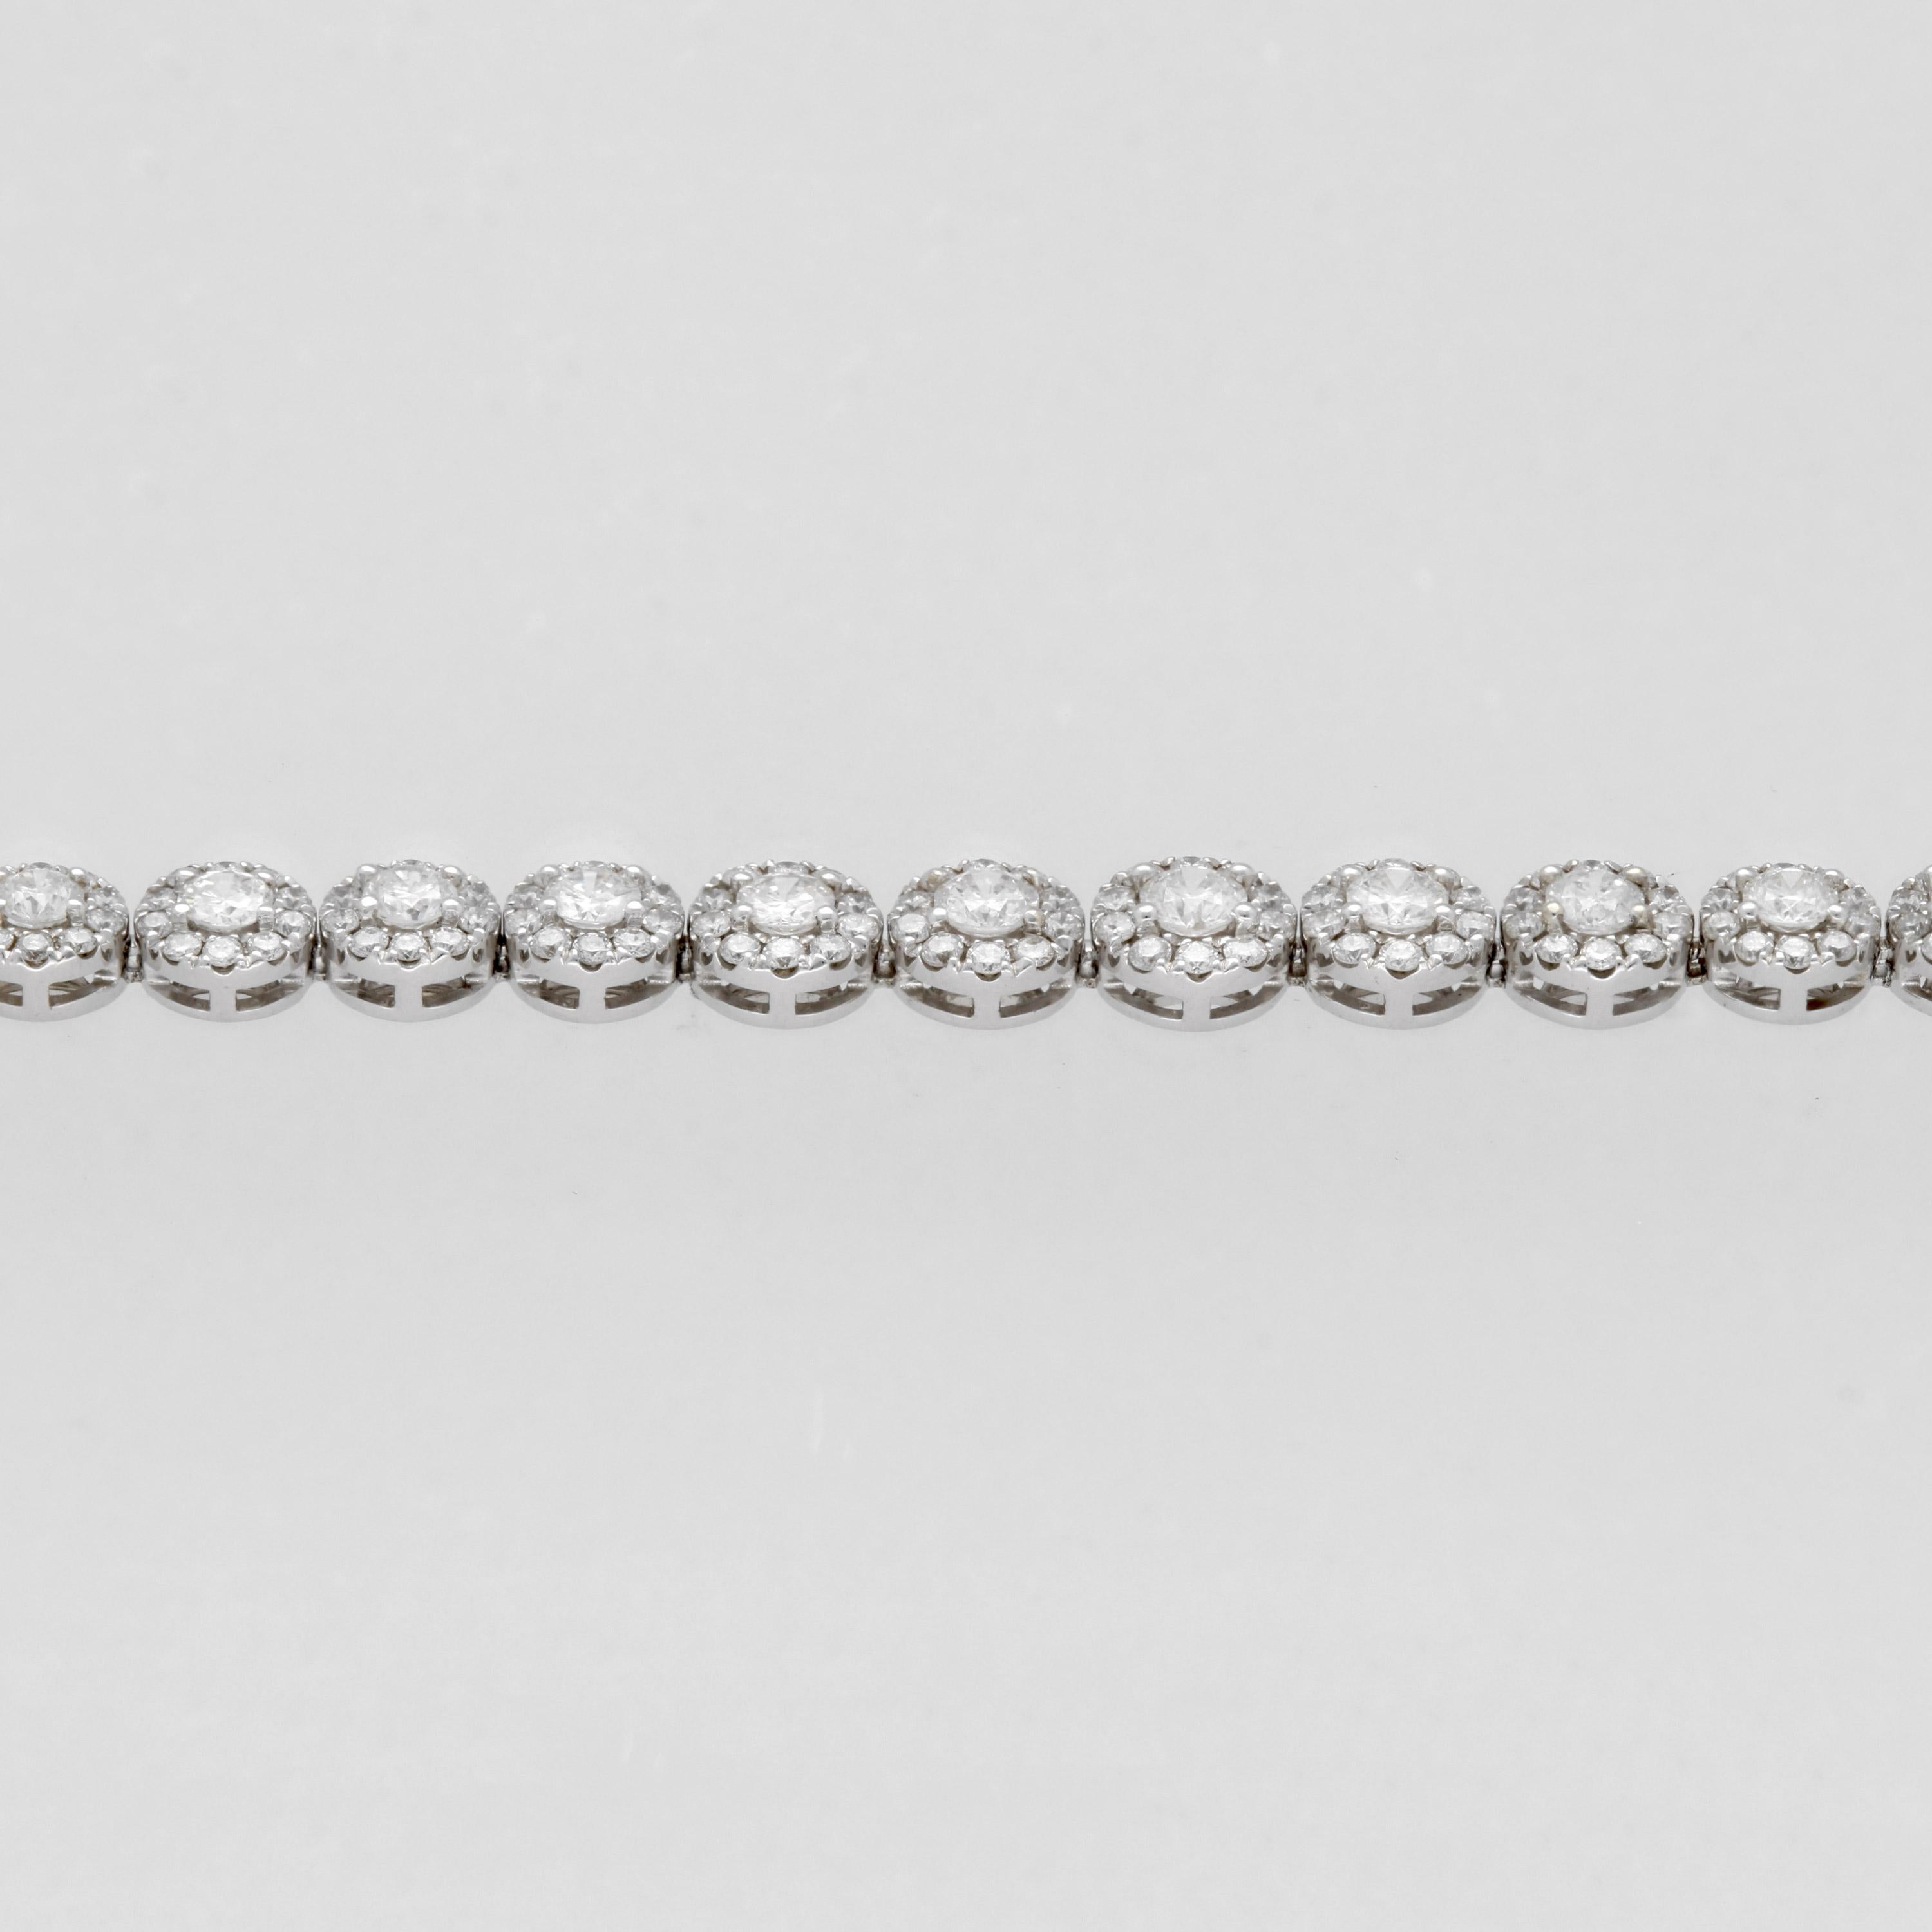 This diamond bracelet is designed by Apex Diamonds and is cast in 14k white gold. It features 6.76 total carat weight of H-I color, SI1 clarity diamonds set in a halo link design. The bracelet is 7 inches in length and is secured by a box clasp.